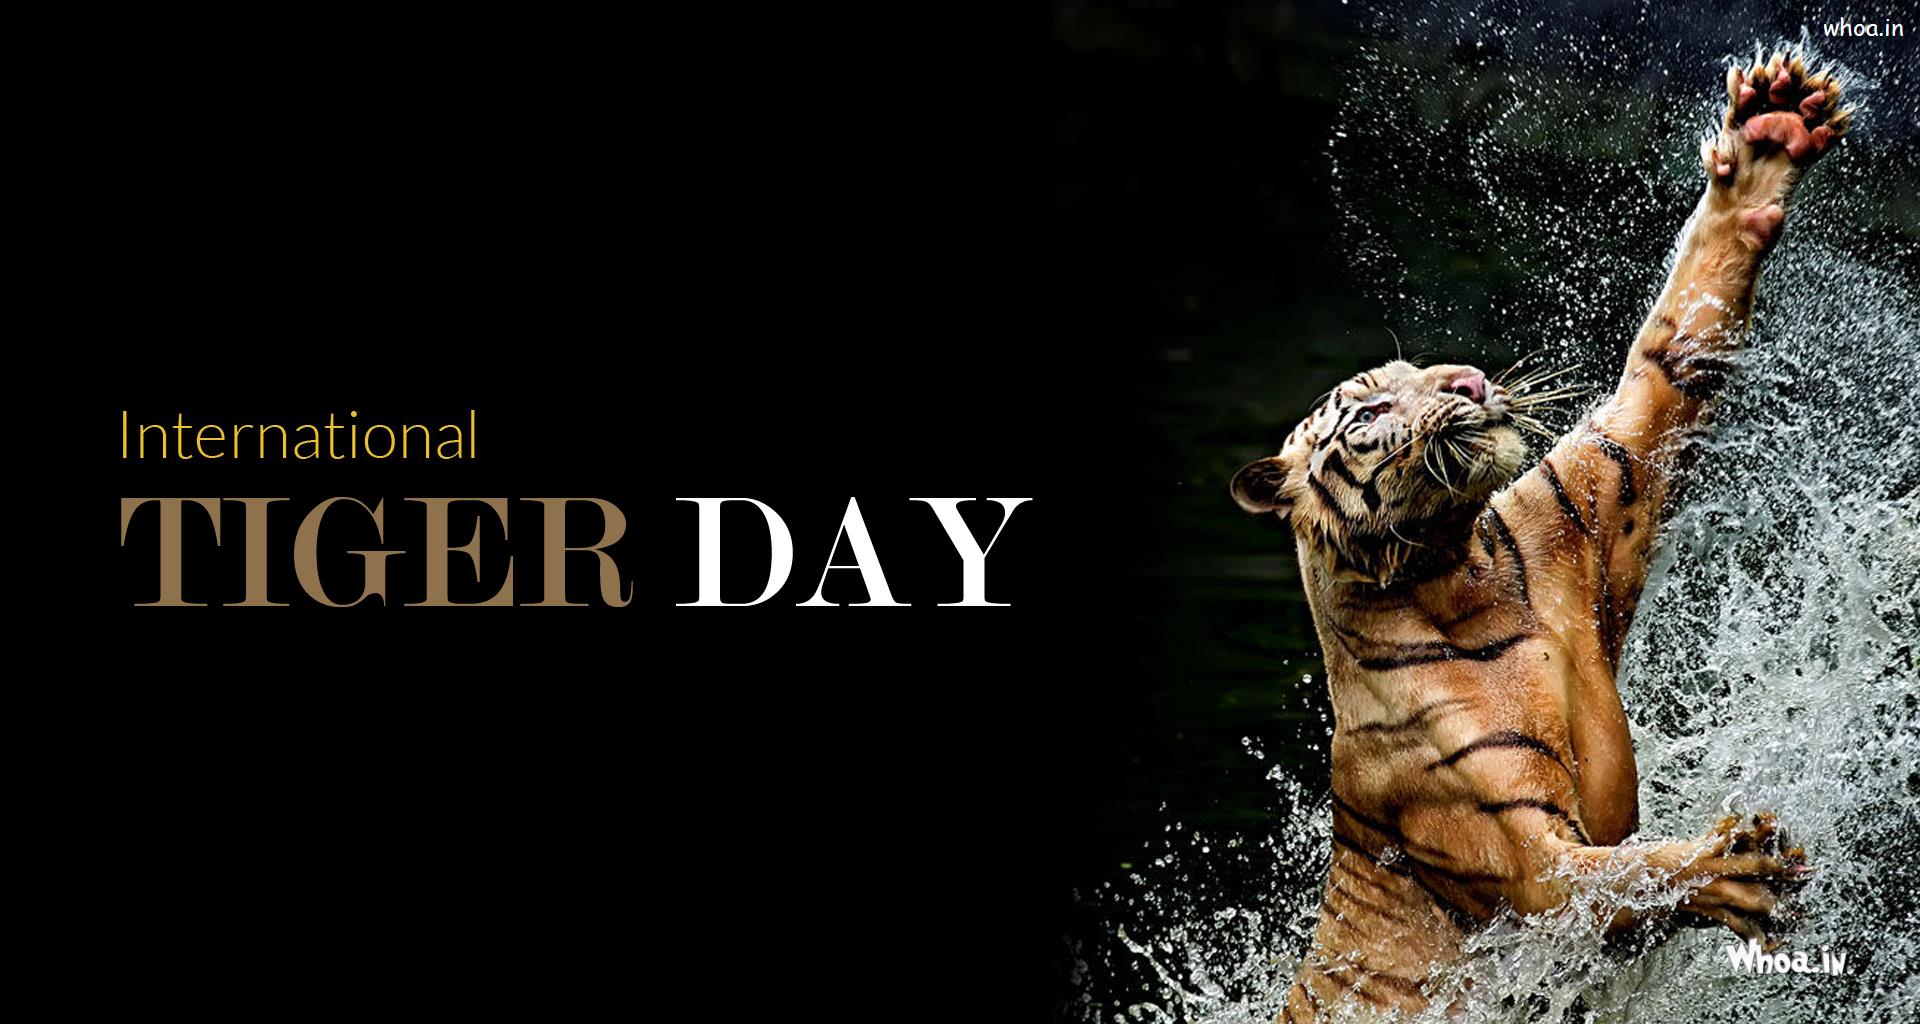 International Tiger Day Wishes E-card